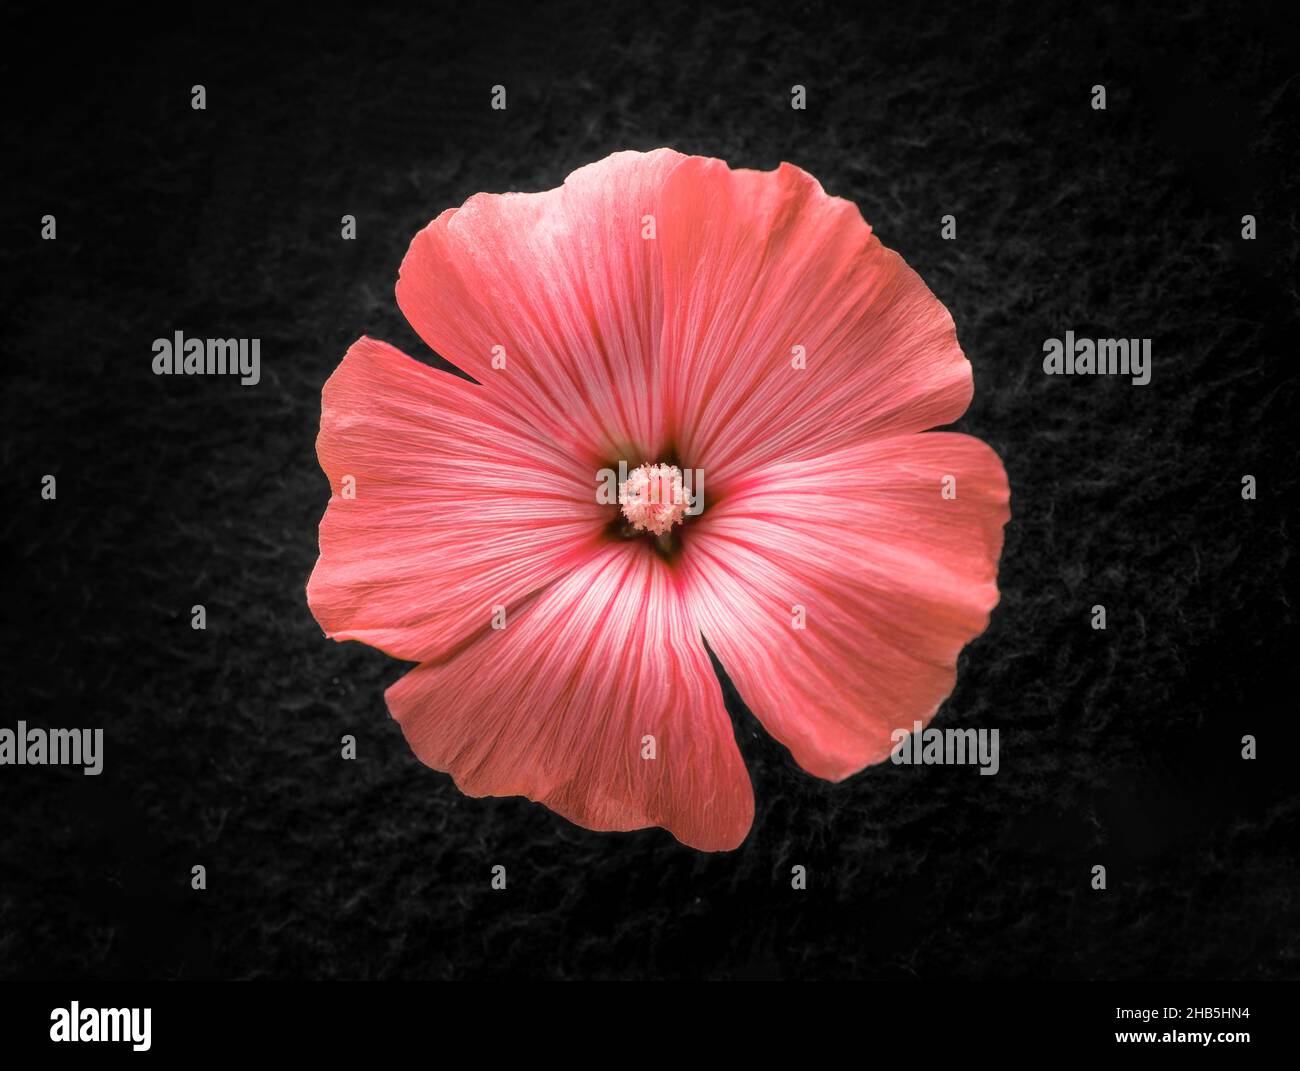 Top view of a flower on a black background. Macro shoot. Stock Photo